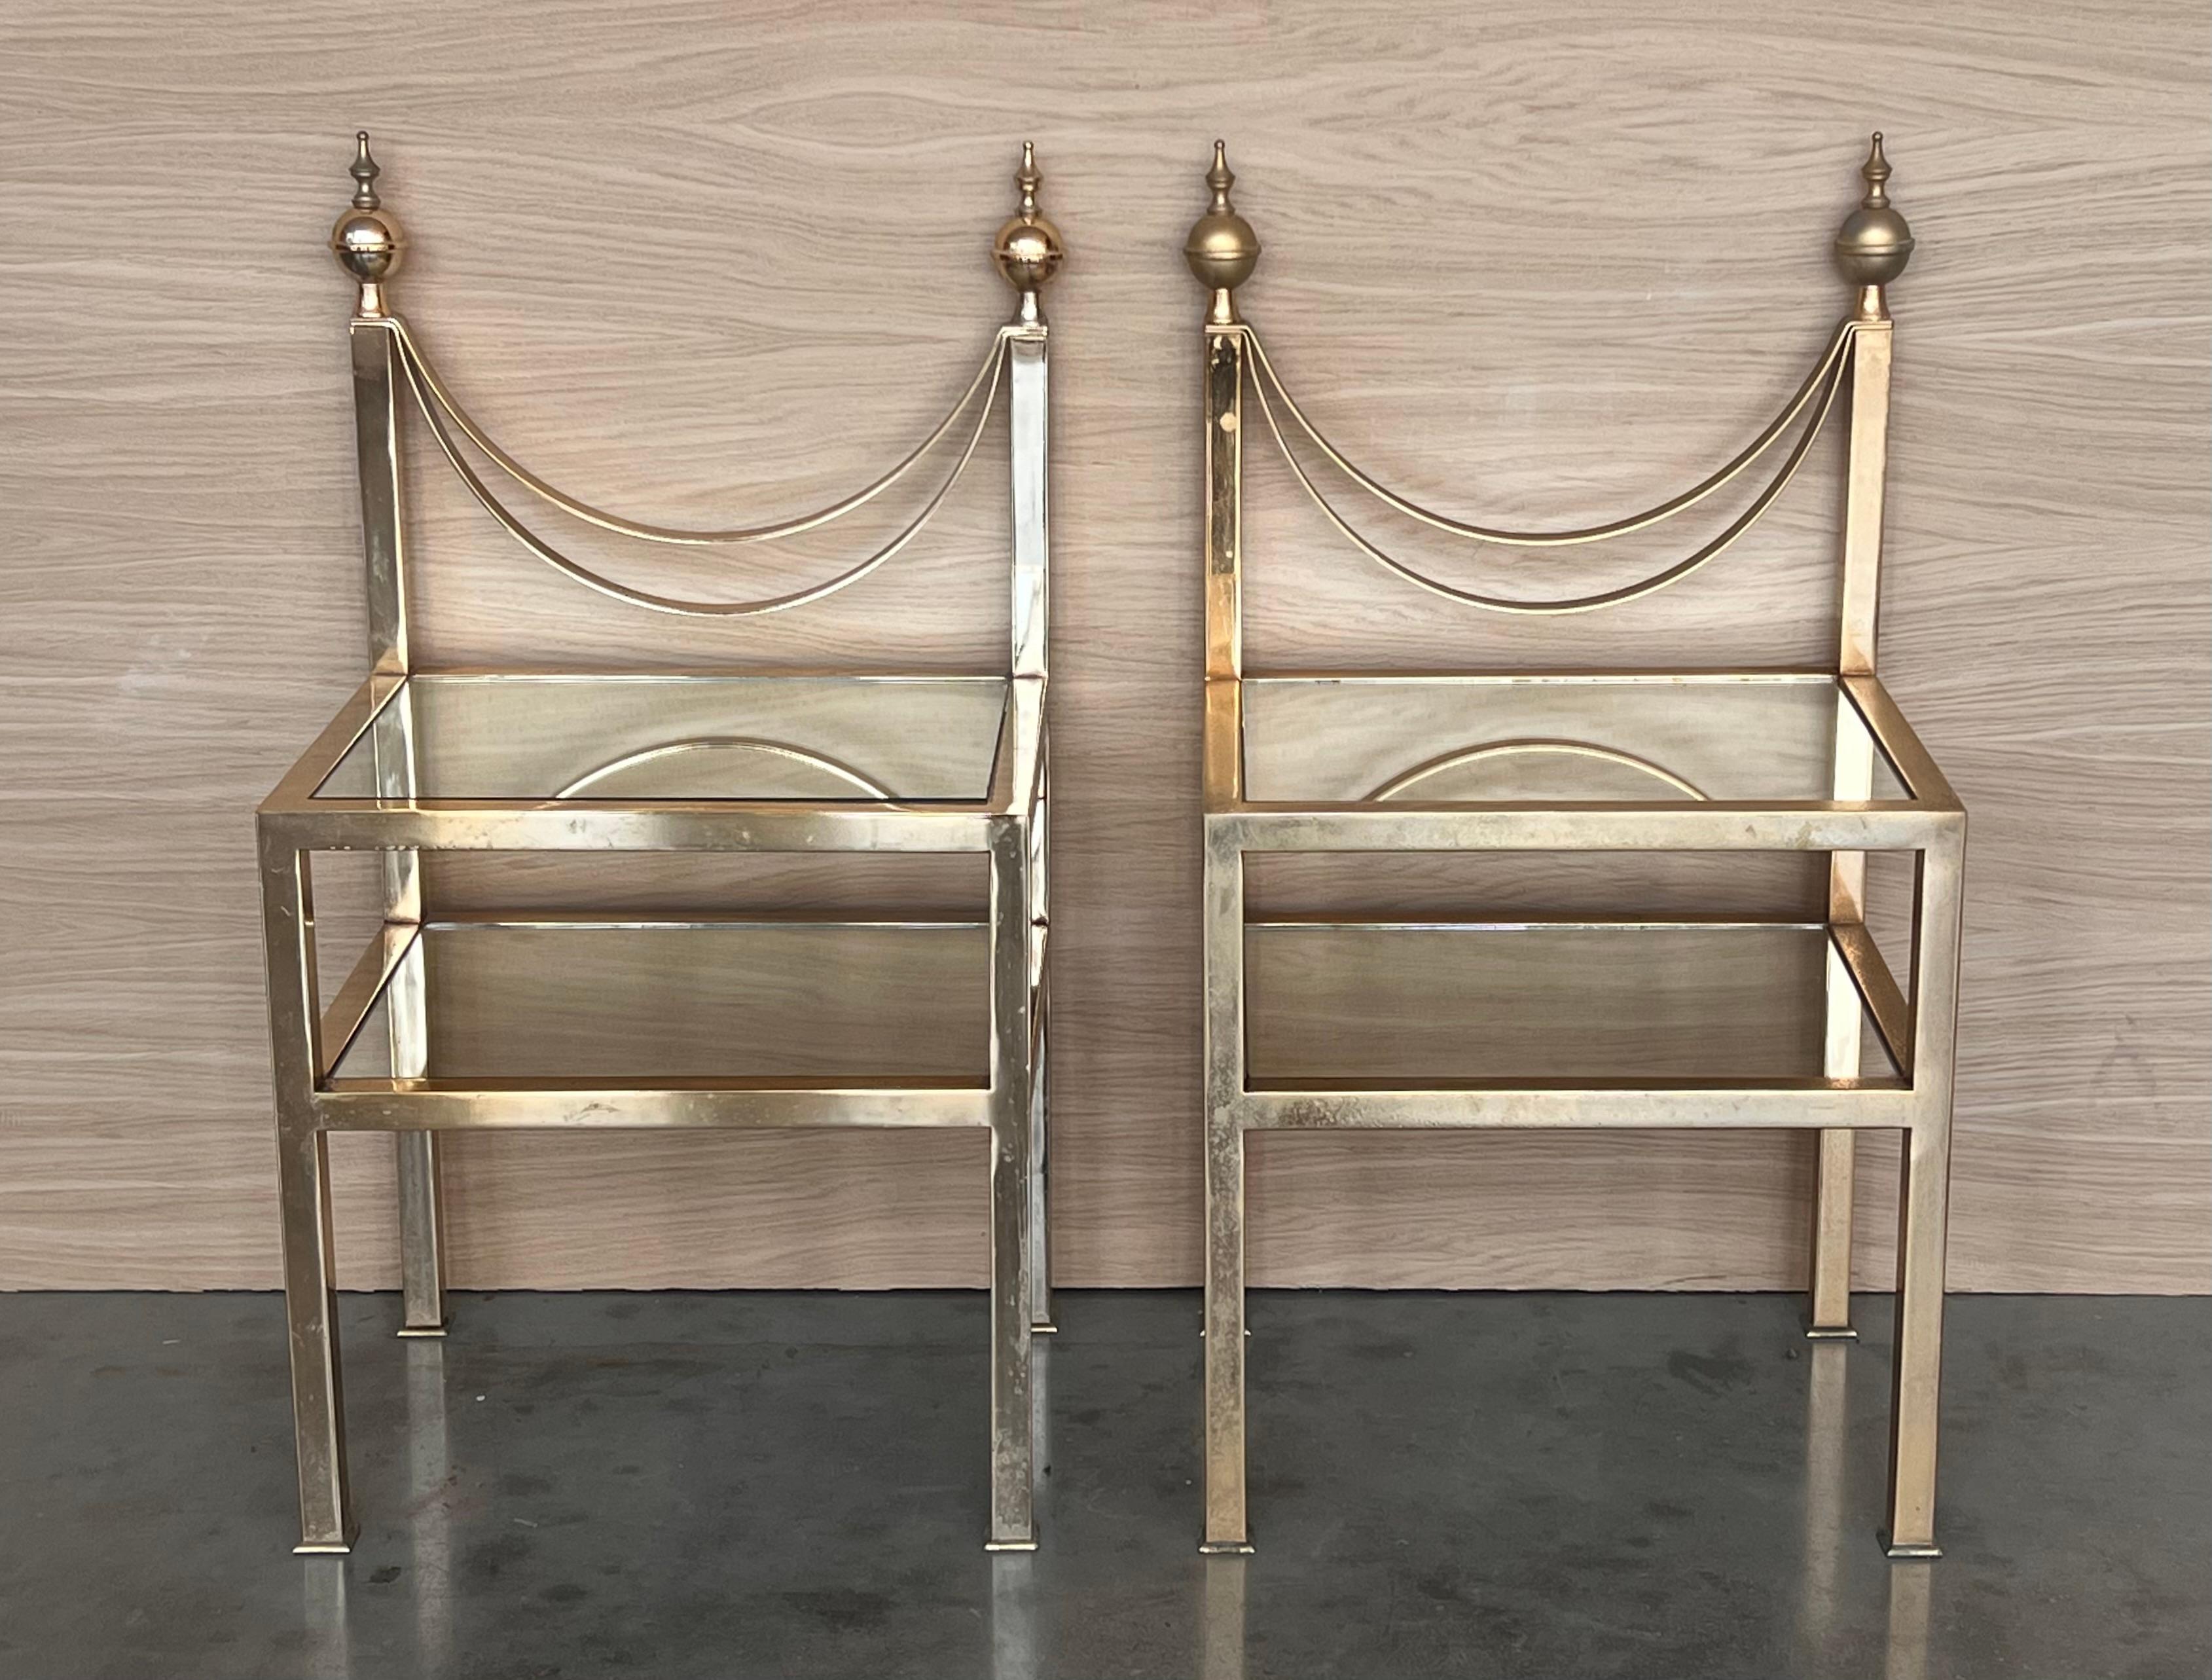 Pair of midcentury Italian two tier brass and glass nightstands with crest.
Simple tables with a low grid shelve and glass top. 

Height to the glass top :18.70in.